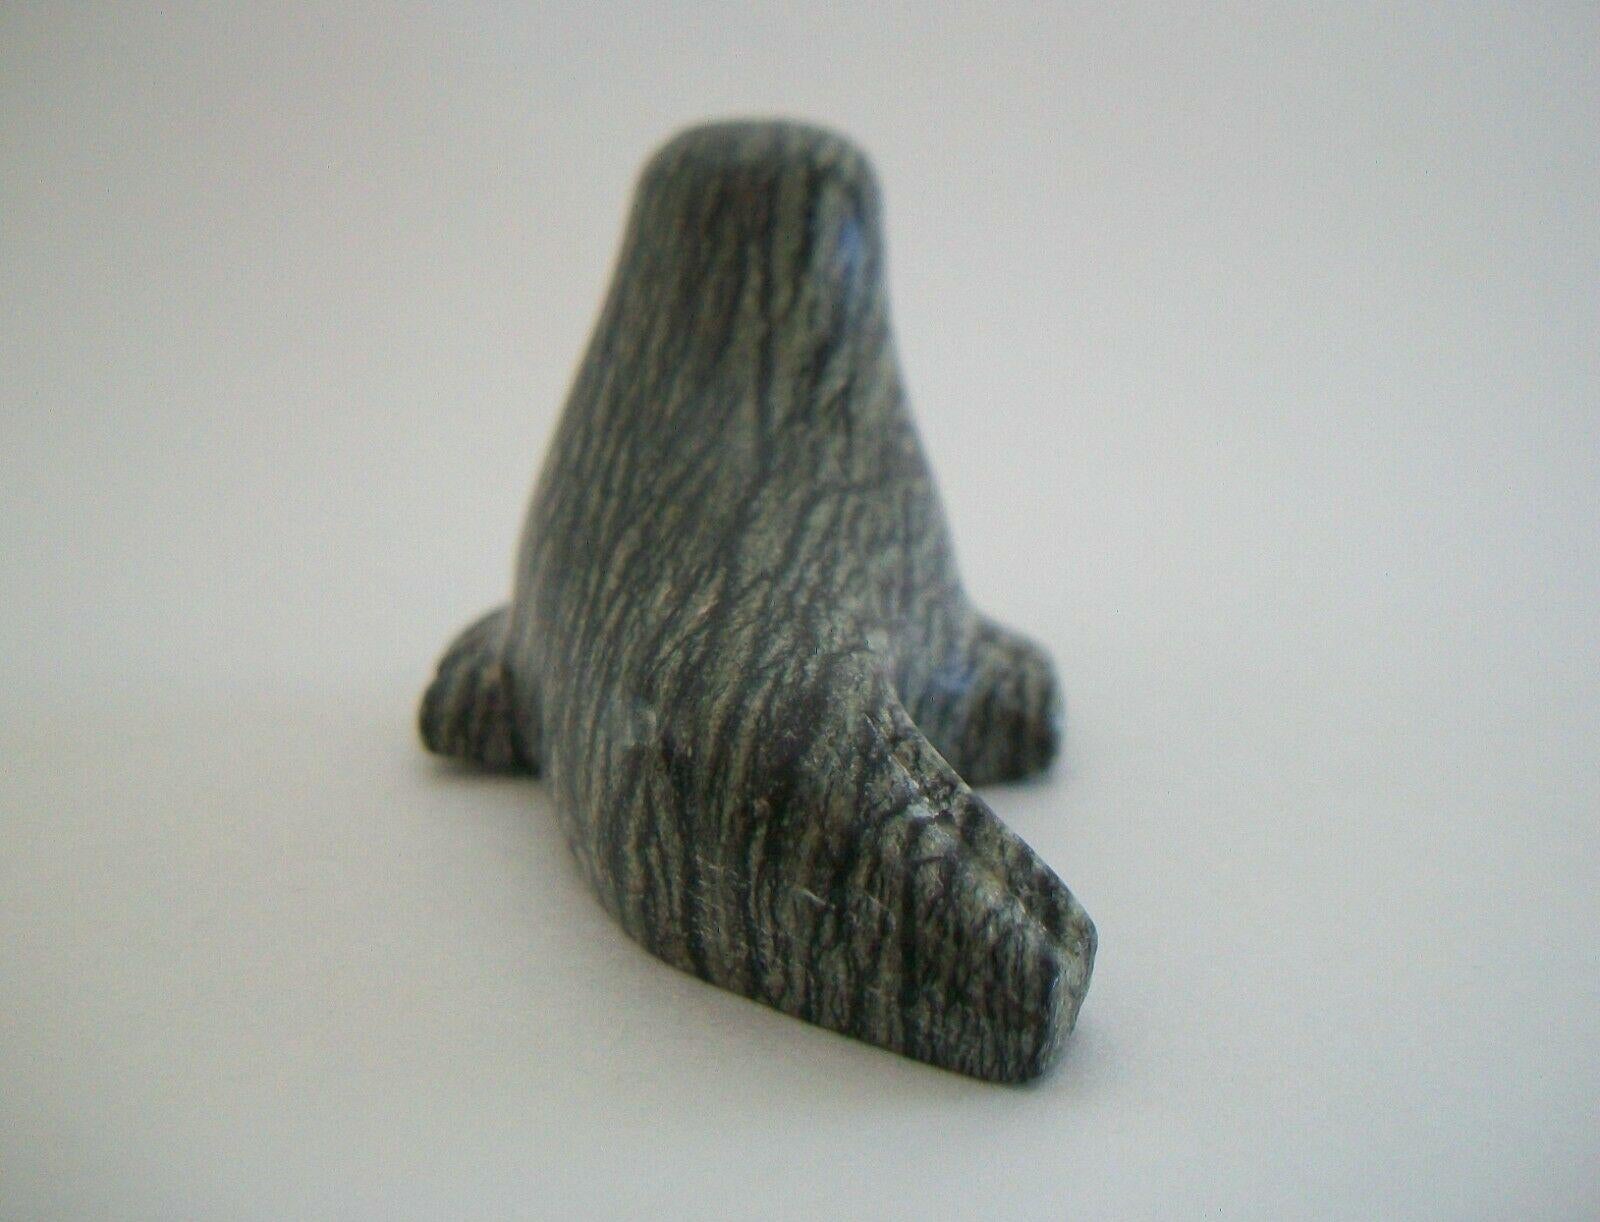 Vintage Cape Dorset Inuit Stone Carving of a Seal, Unsigned, Canada, C.1960's For Sale 1